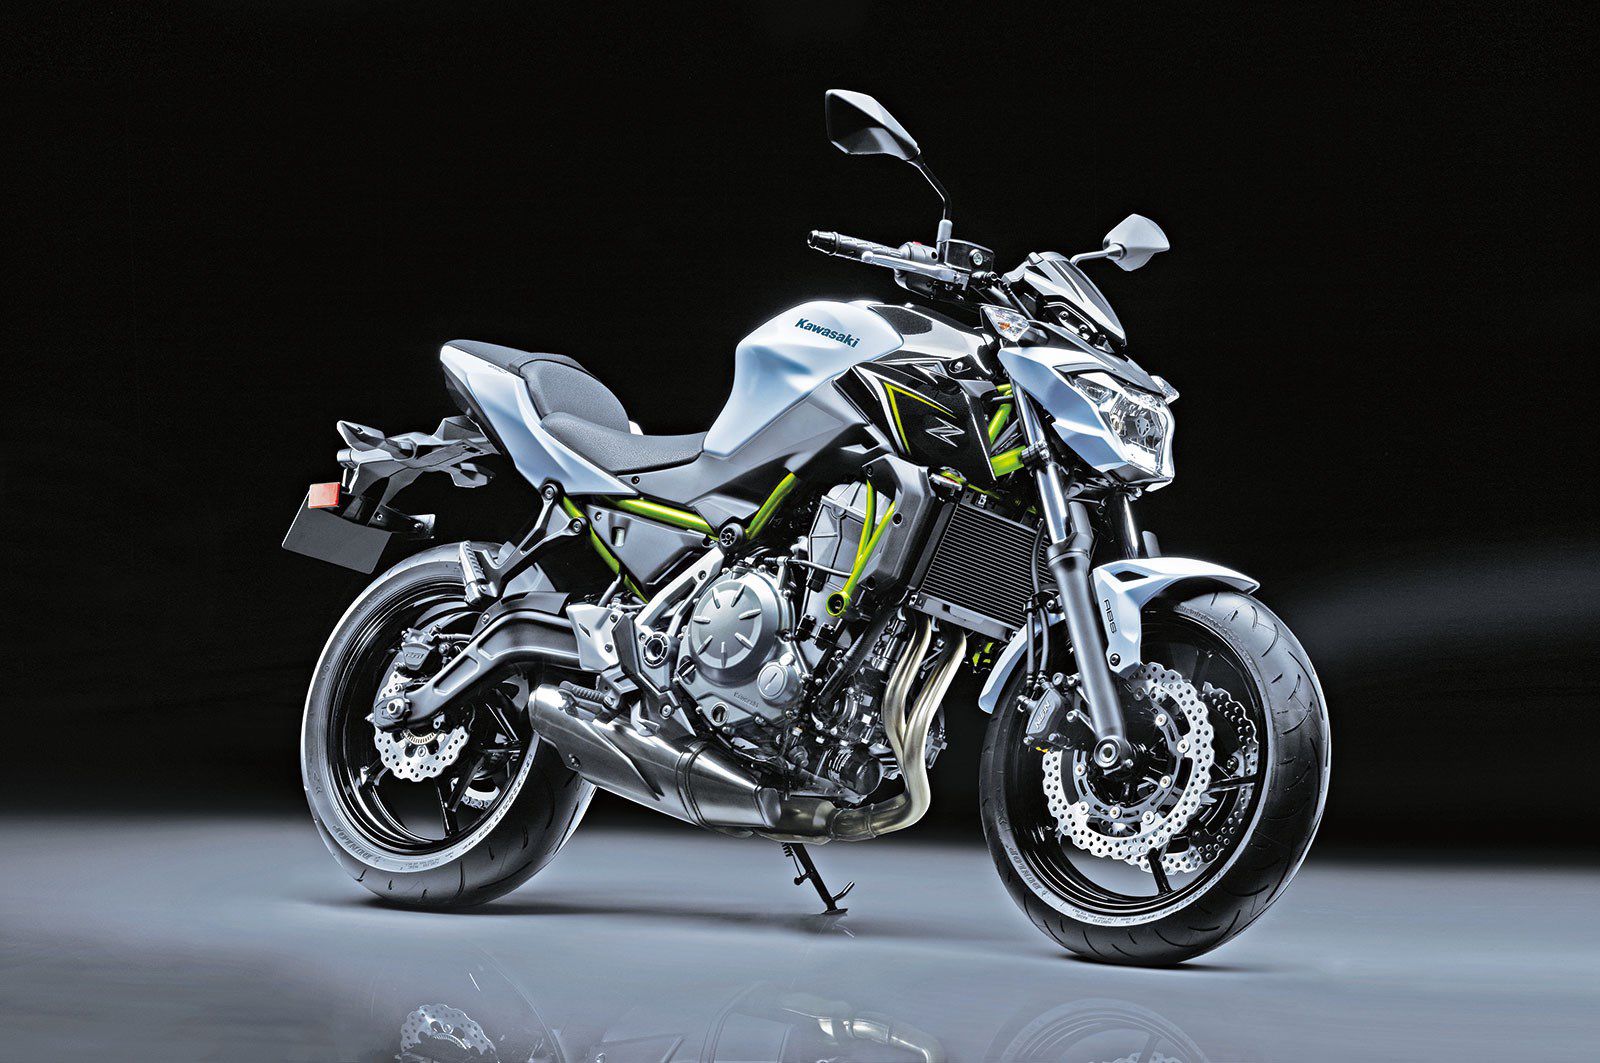 Kawasaki Z650 Is A Middleweight Stunner | Cycle World